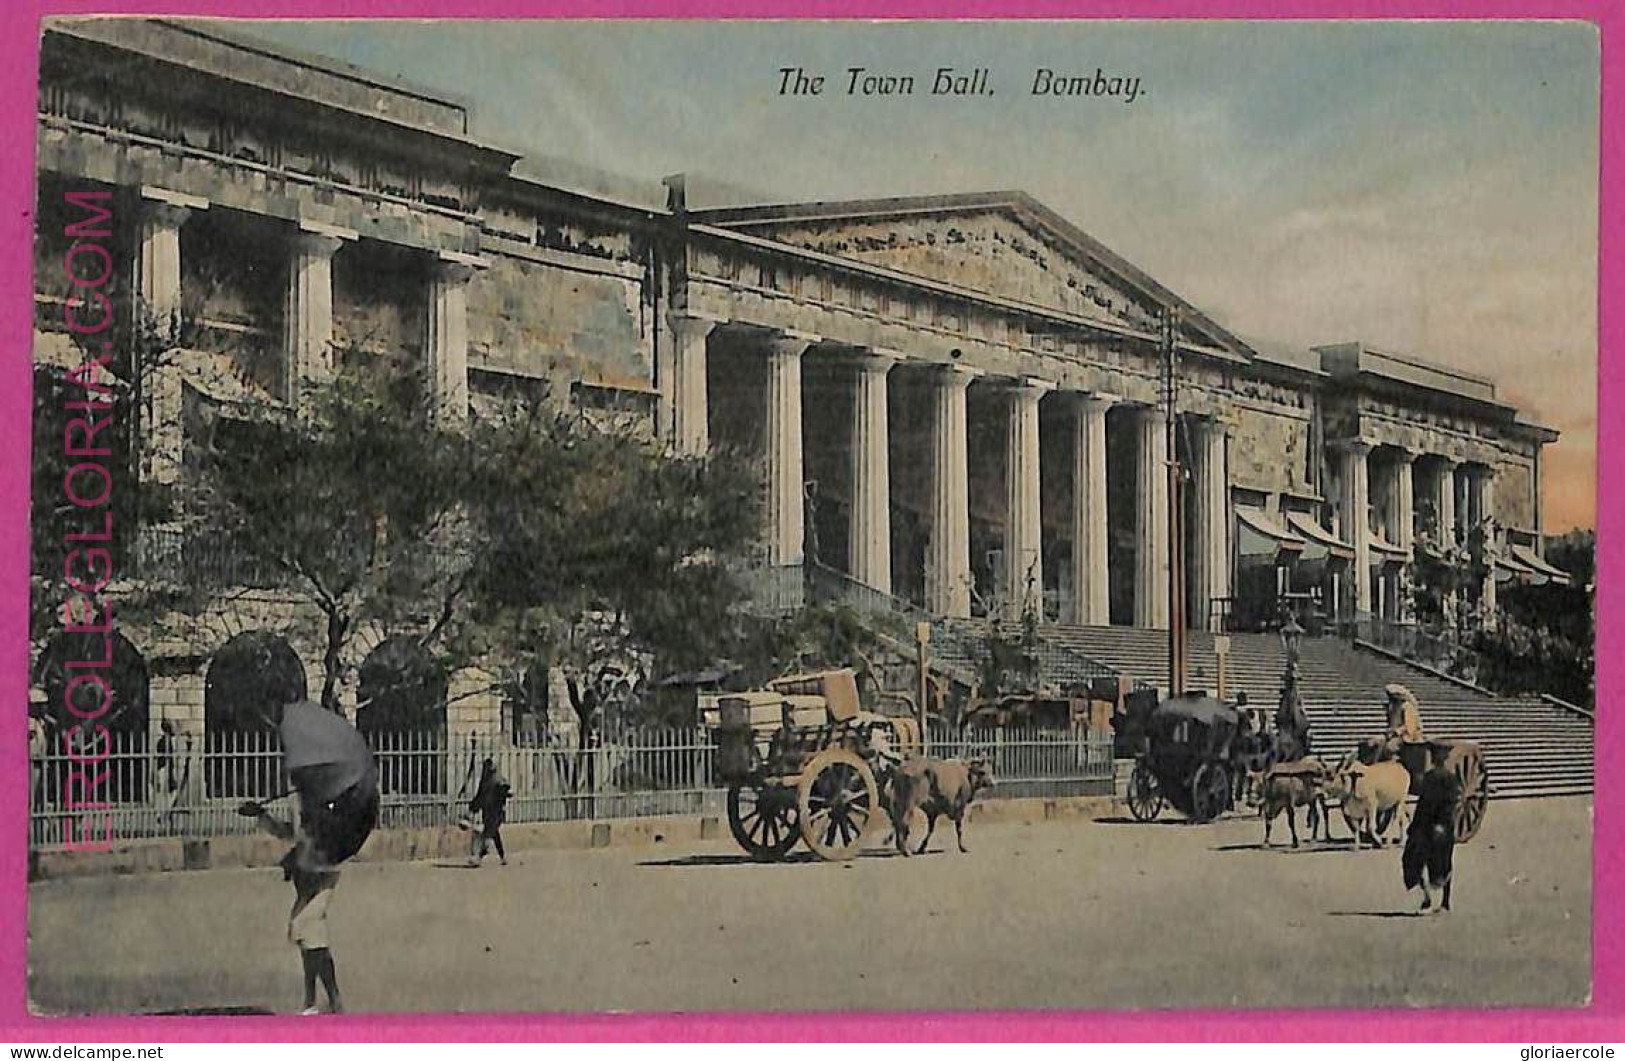 Ag3848  - INDIA - VINTAGE POSTCARD   -  Bombay  - The Town Hall - India